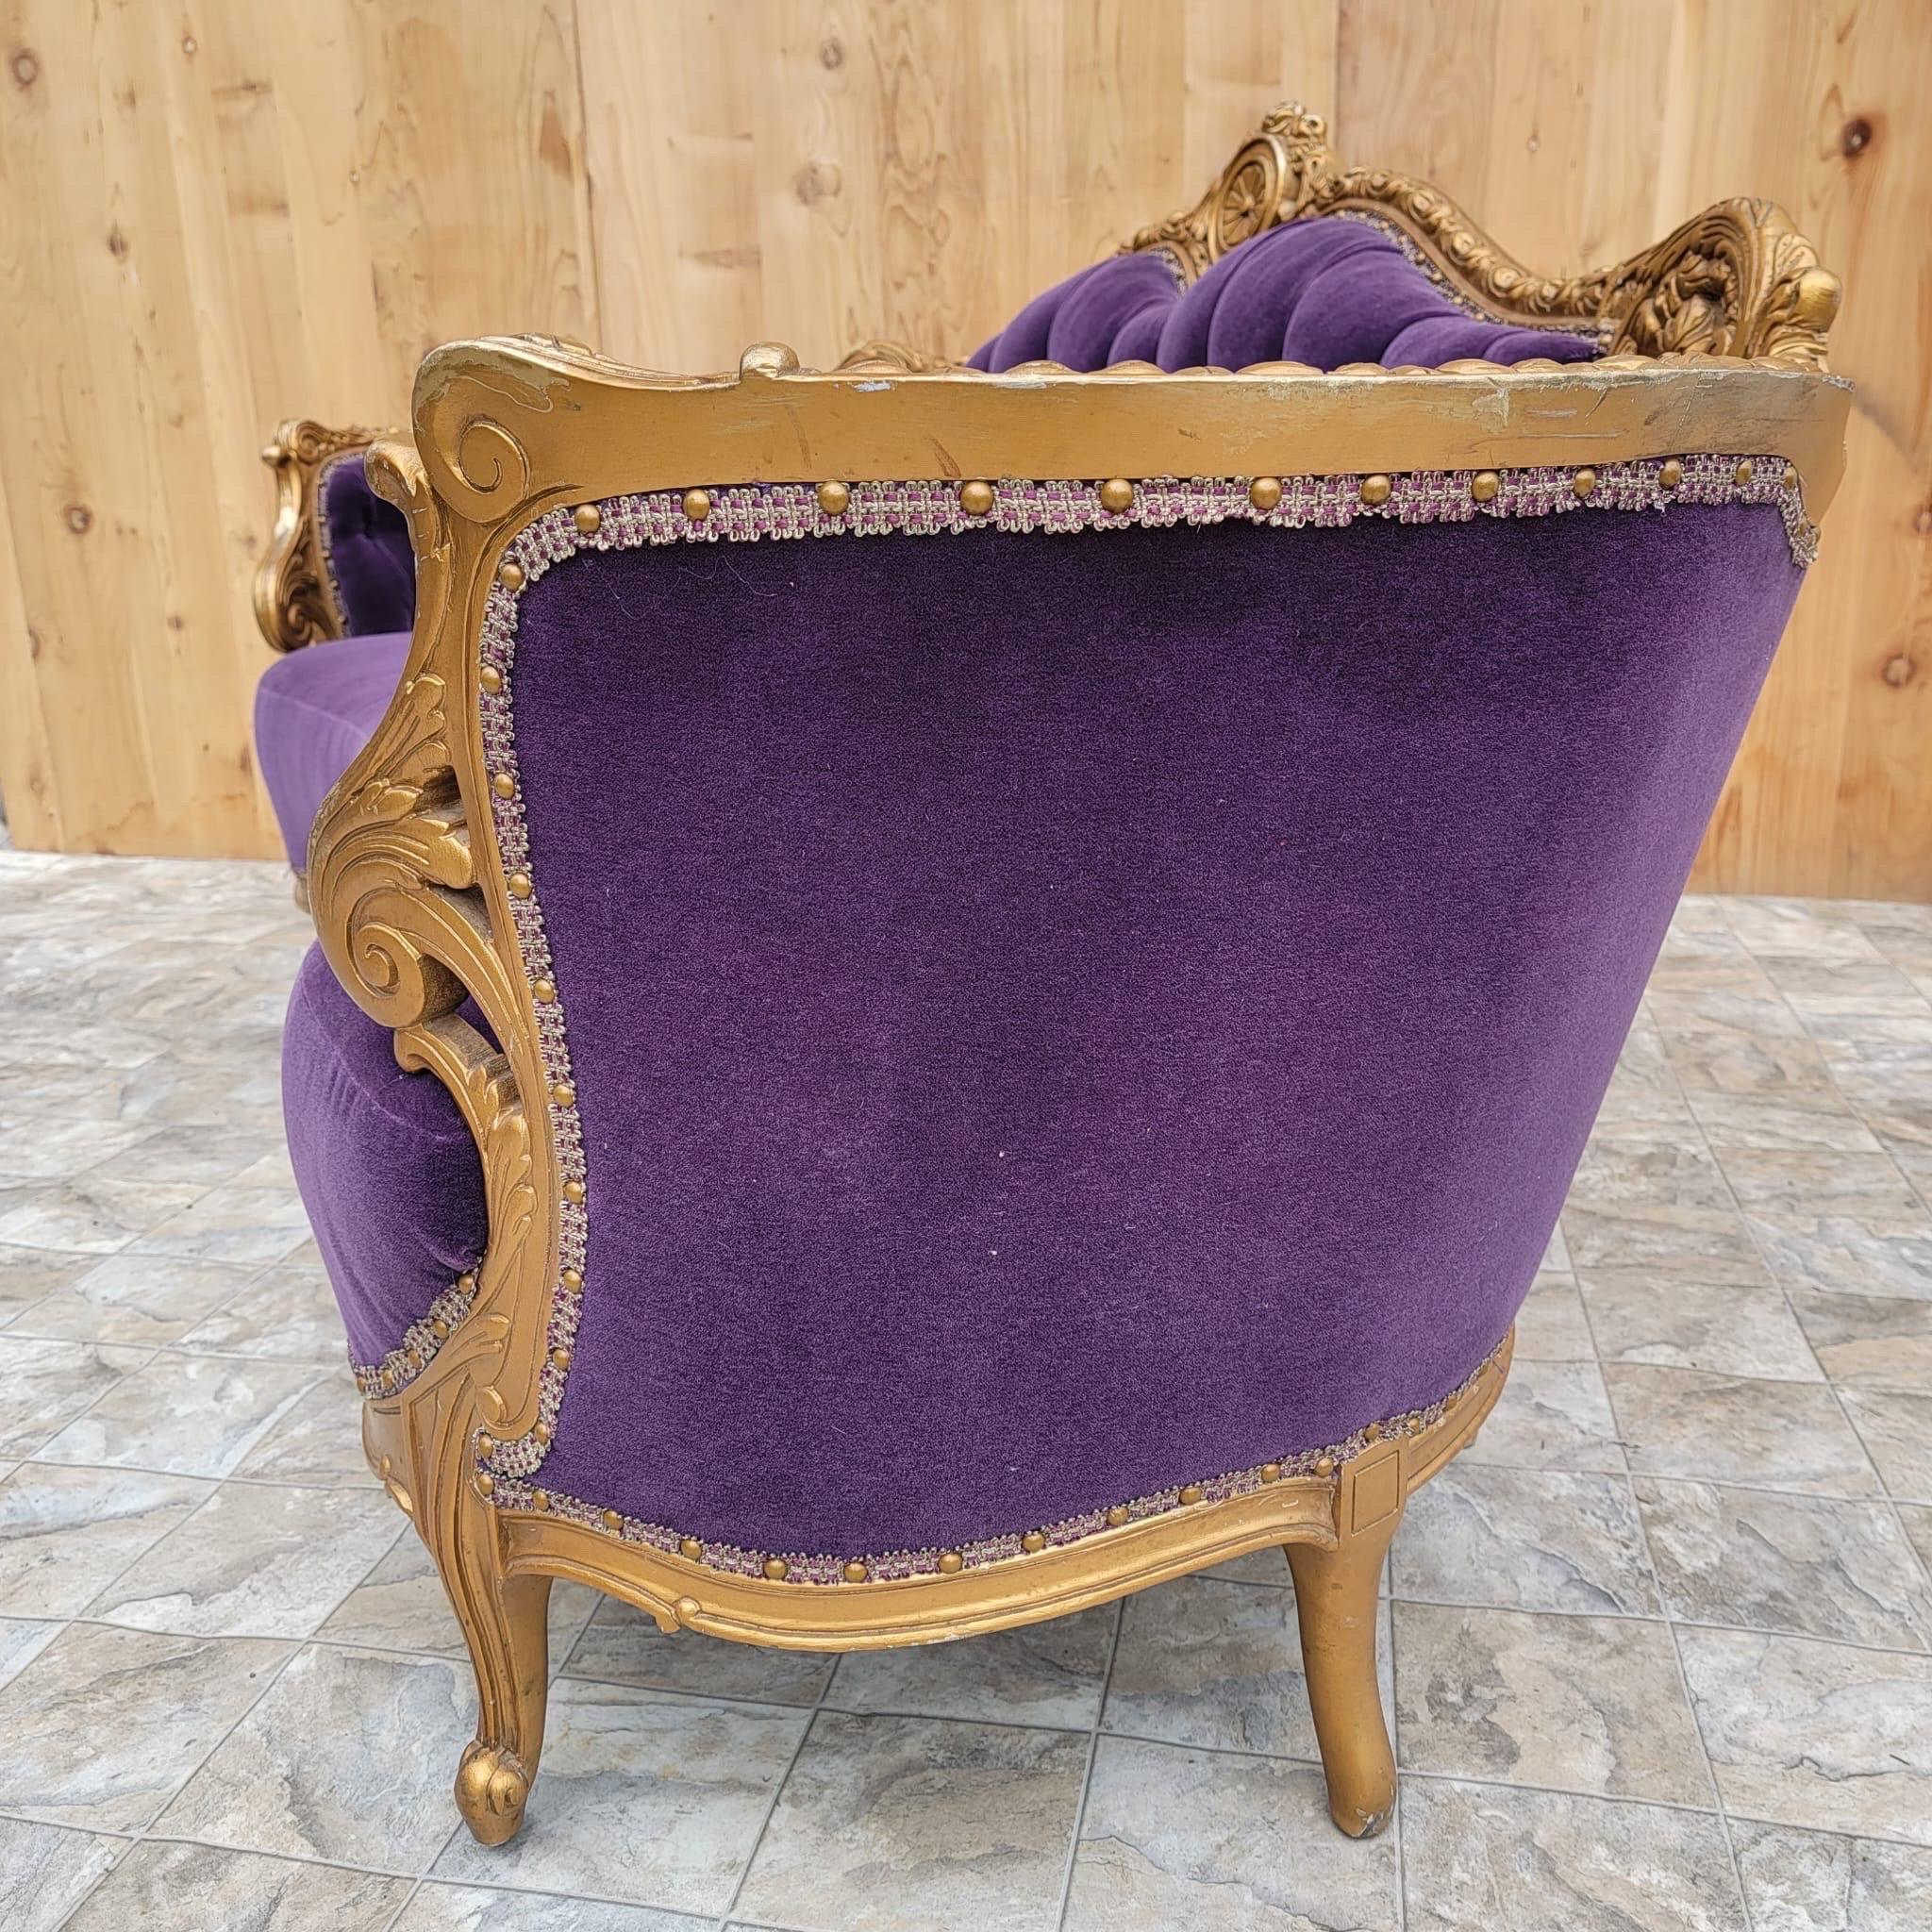 Antique Louis Style Carved Ornate Parlor Set Newly Upholstered in a High End Purple Mohair - 2 Piece Set 

This beautiful set includes a settee and armchair in a beautiful purple Mohair. 

Circa 19th Century

Settee

H 40